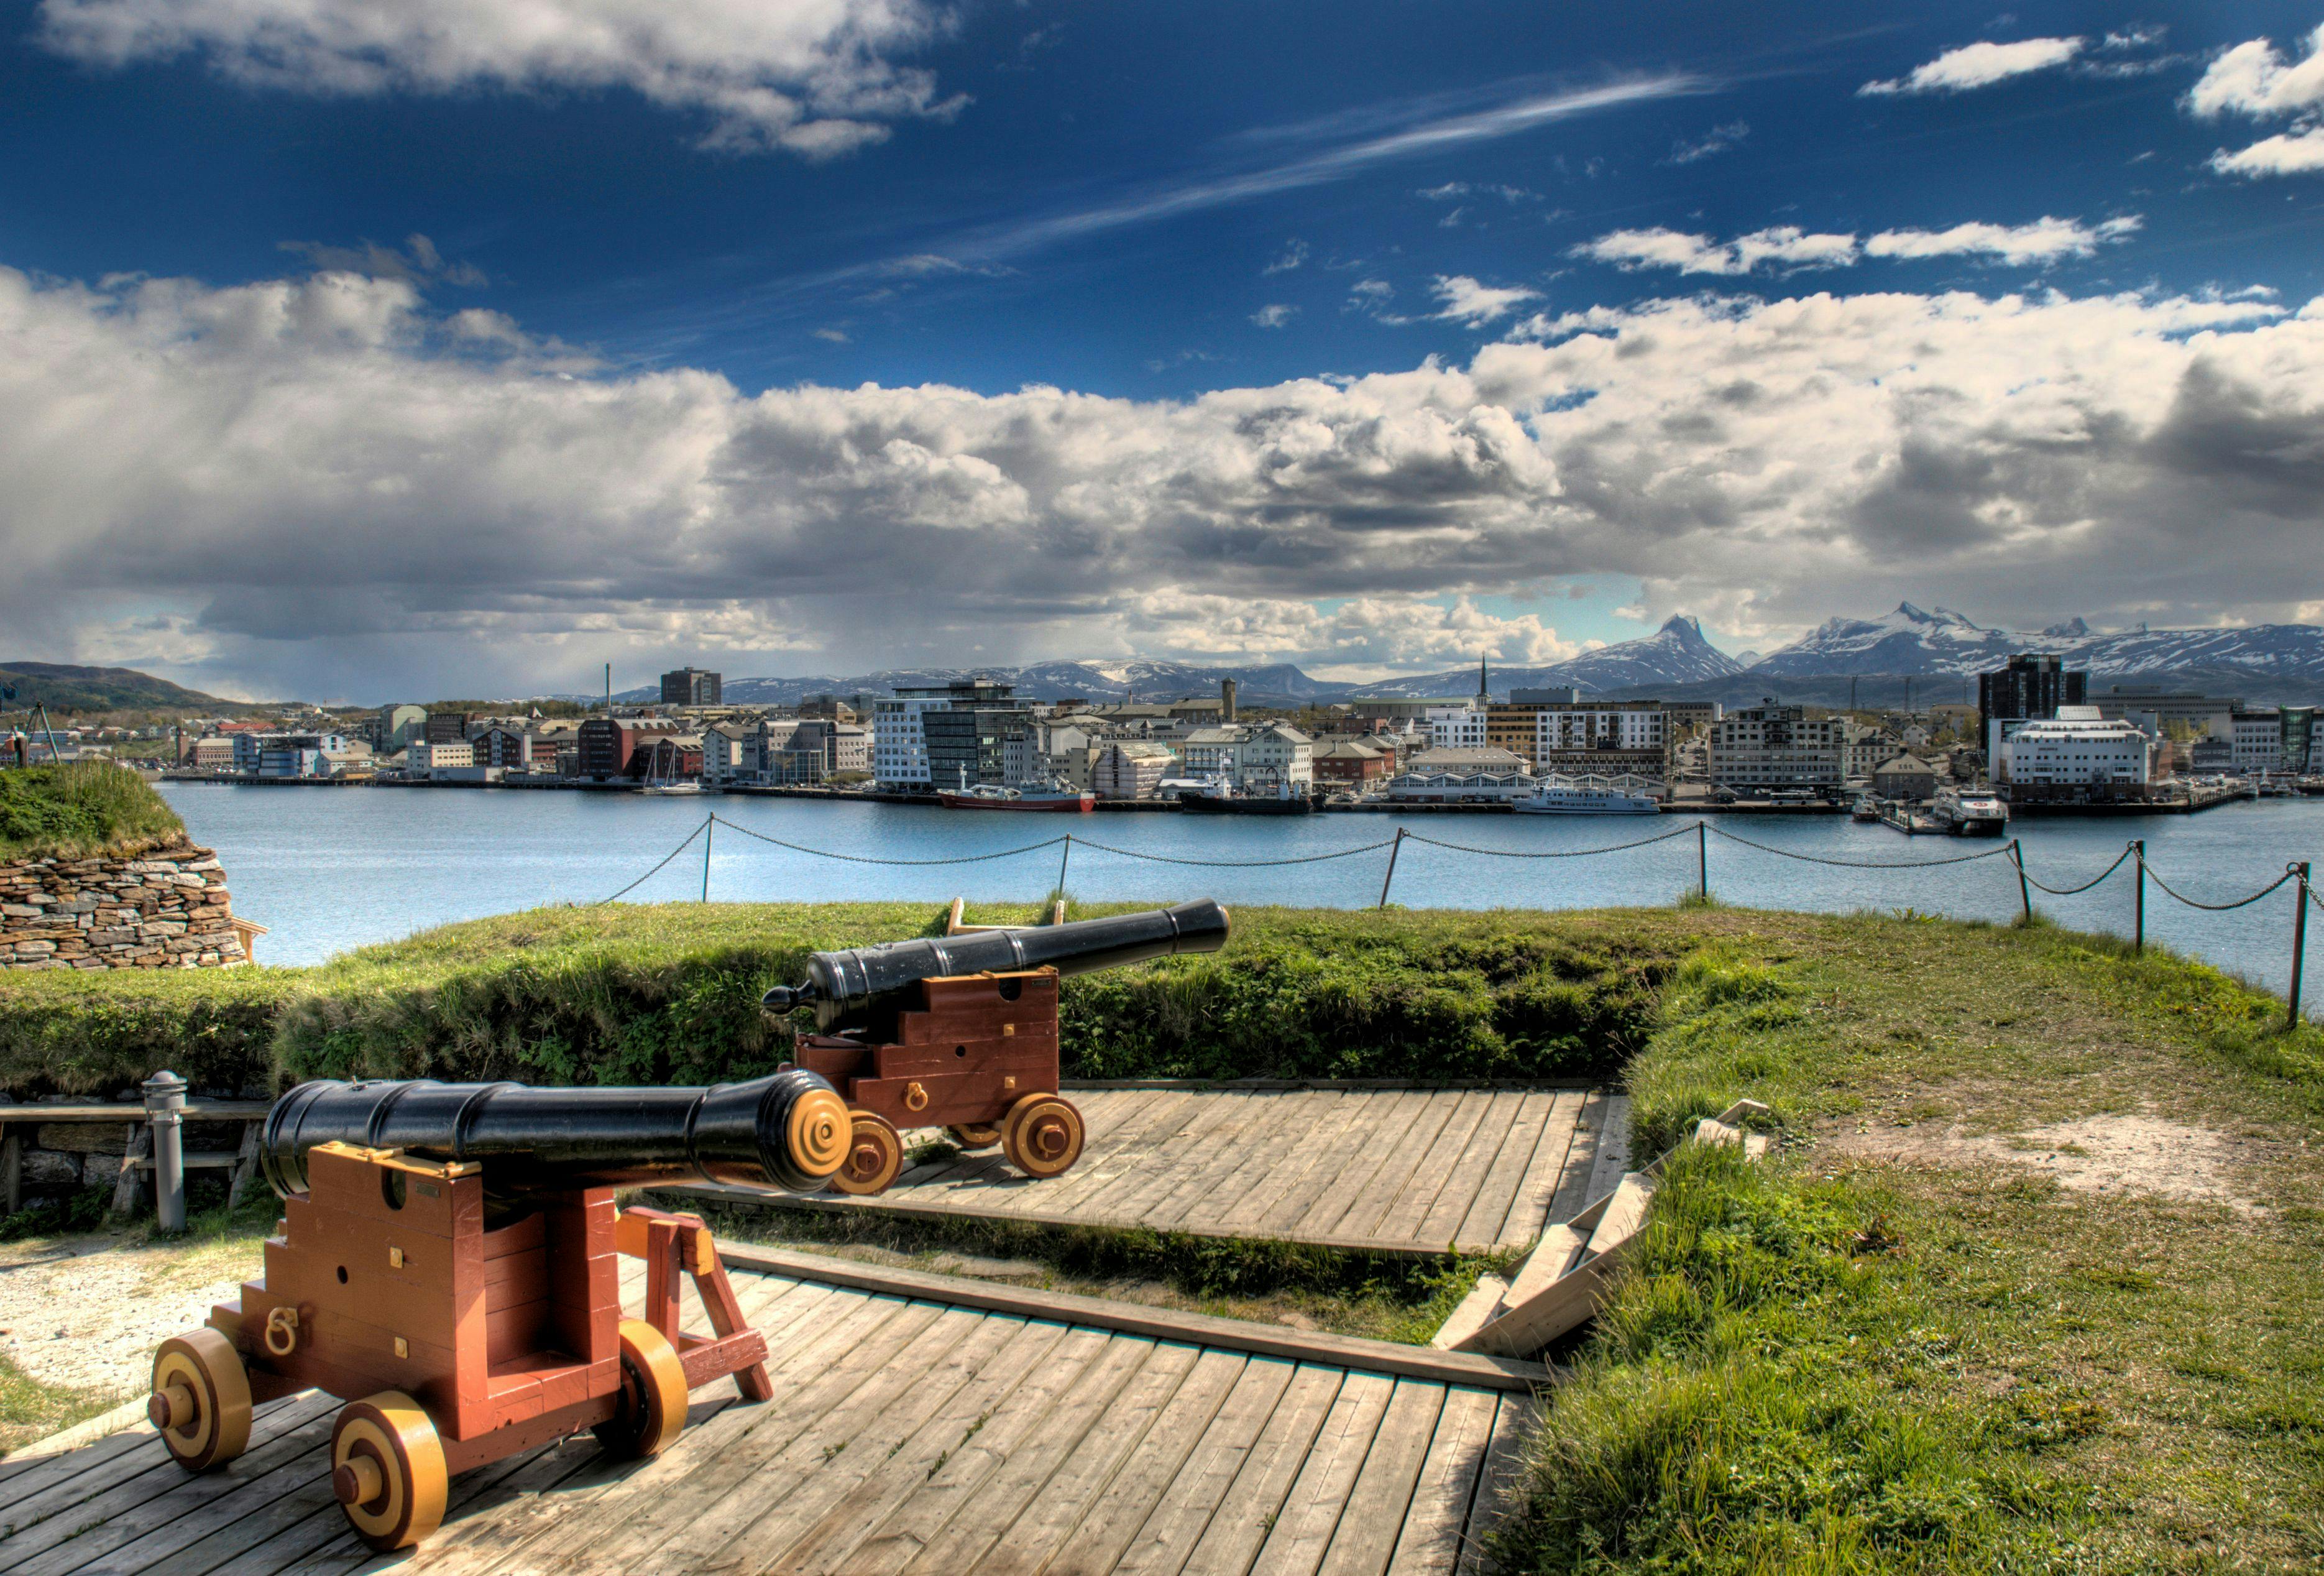 Canons outside of Bodø City